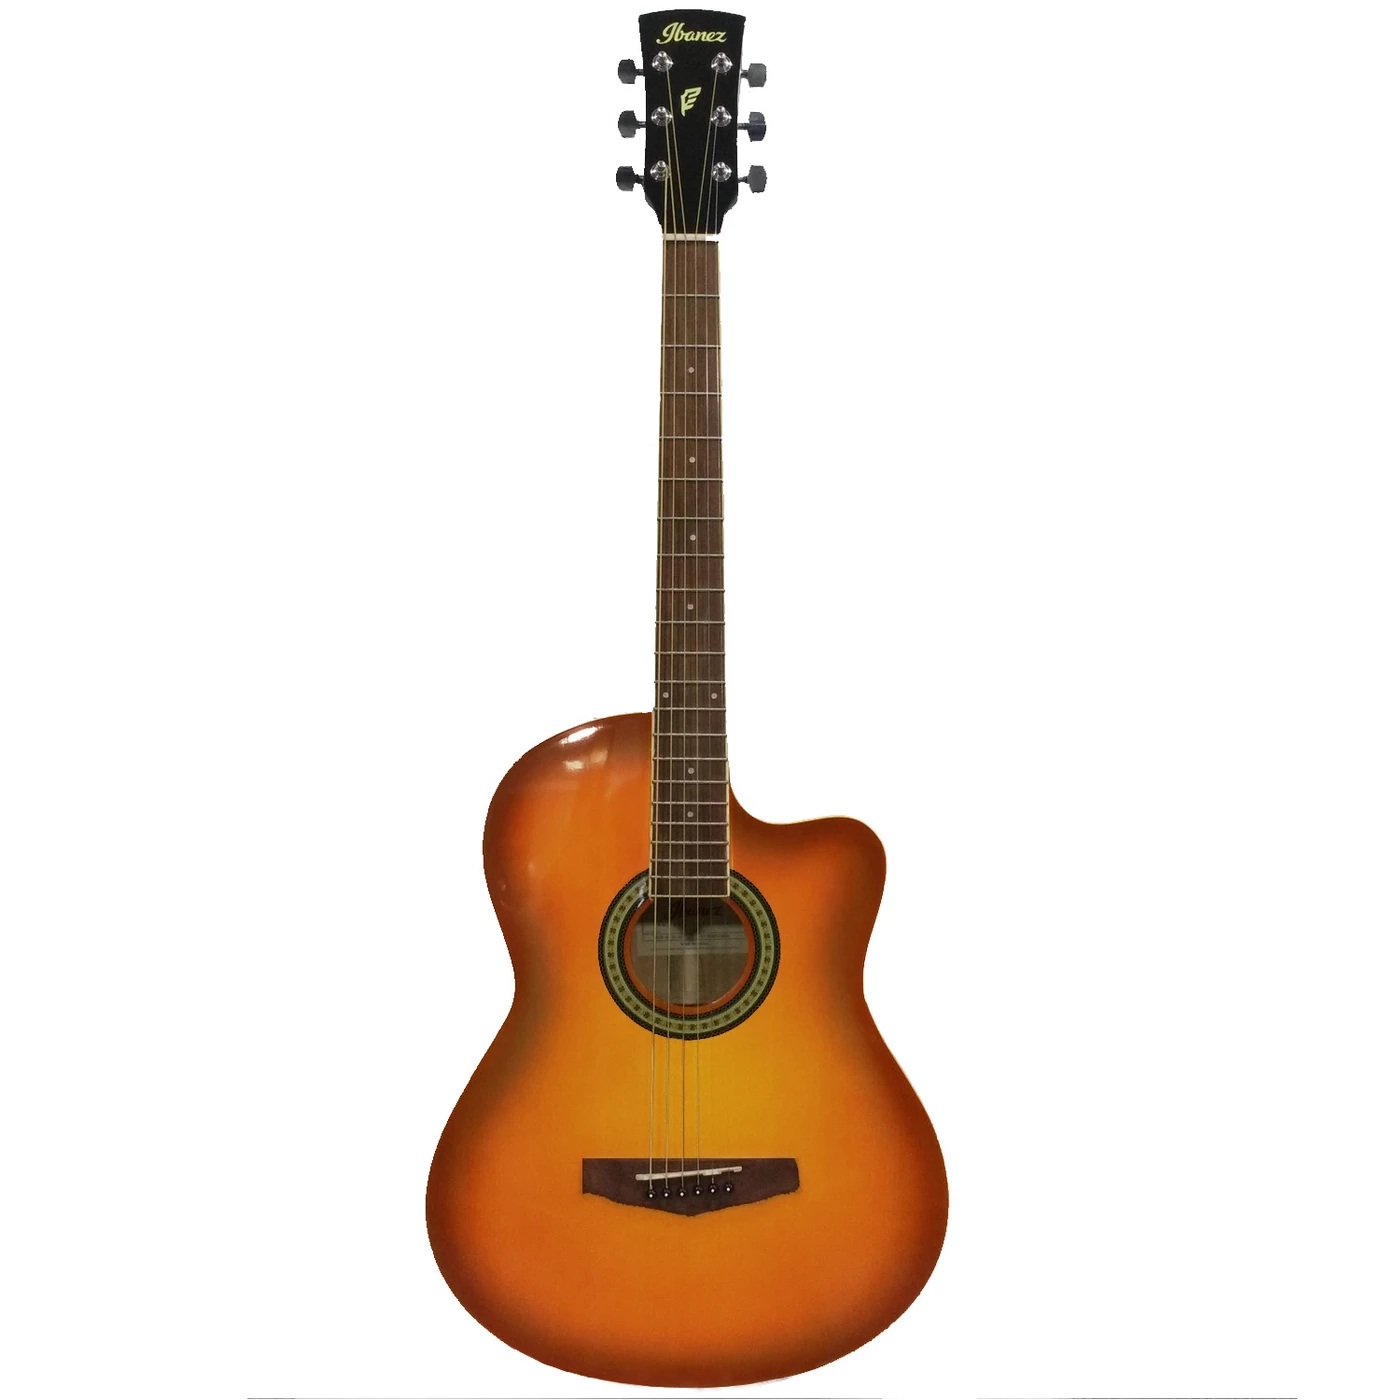 Buy ibanez md39c online price in india